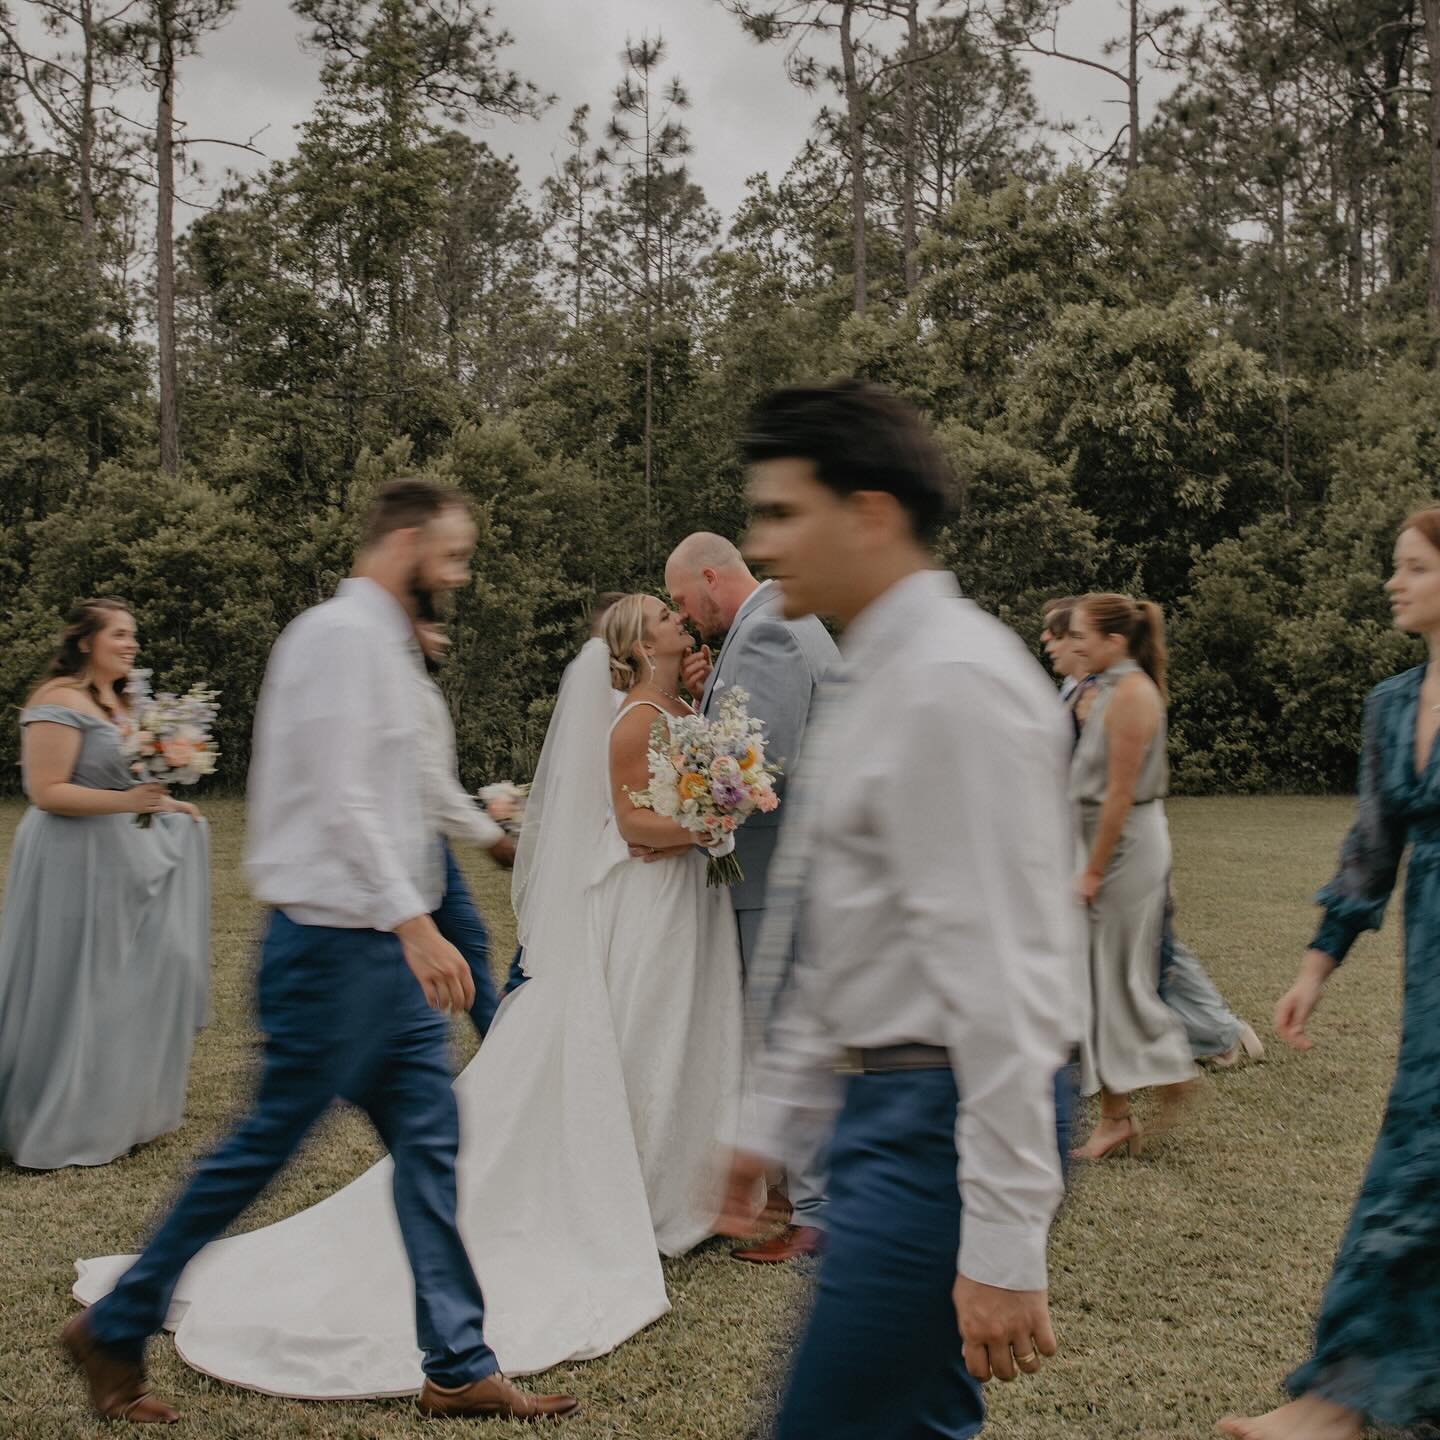 Introducing Mr. &amp; Mrs. Baltensperger 🤍

A beautiful day surrounded by the most beautiful people and I was honored to be a part of it. 

Vendors:
@themanorat12oaks 
@toastweddings
@parkersevents 
@sweetsbystaci 
@pjscateringjax 
@nicstudios 
@fbe